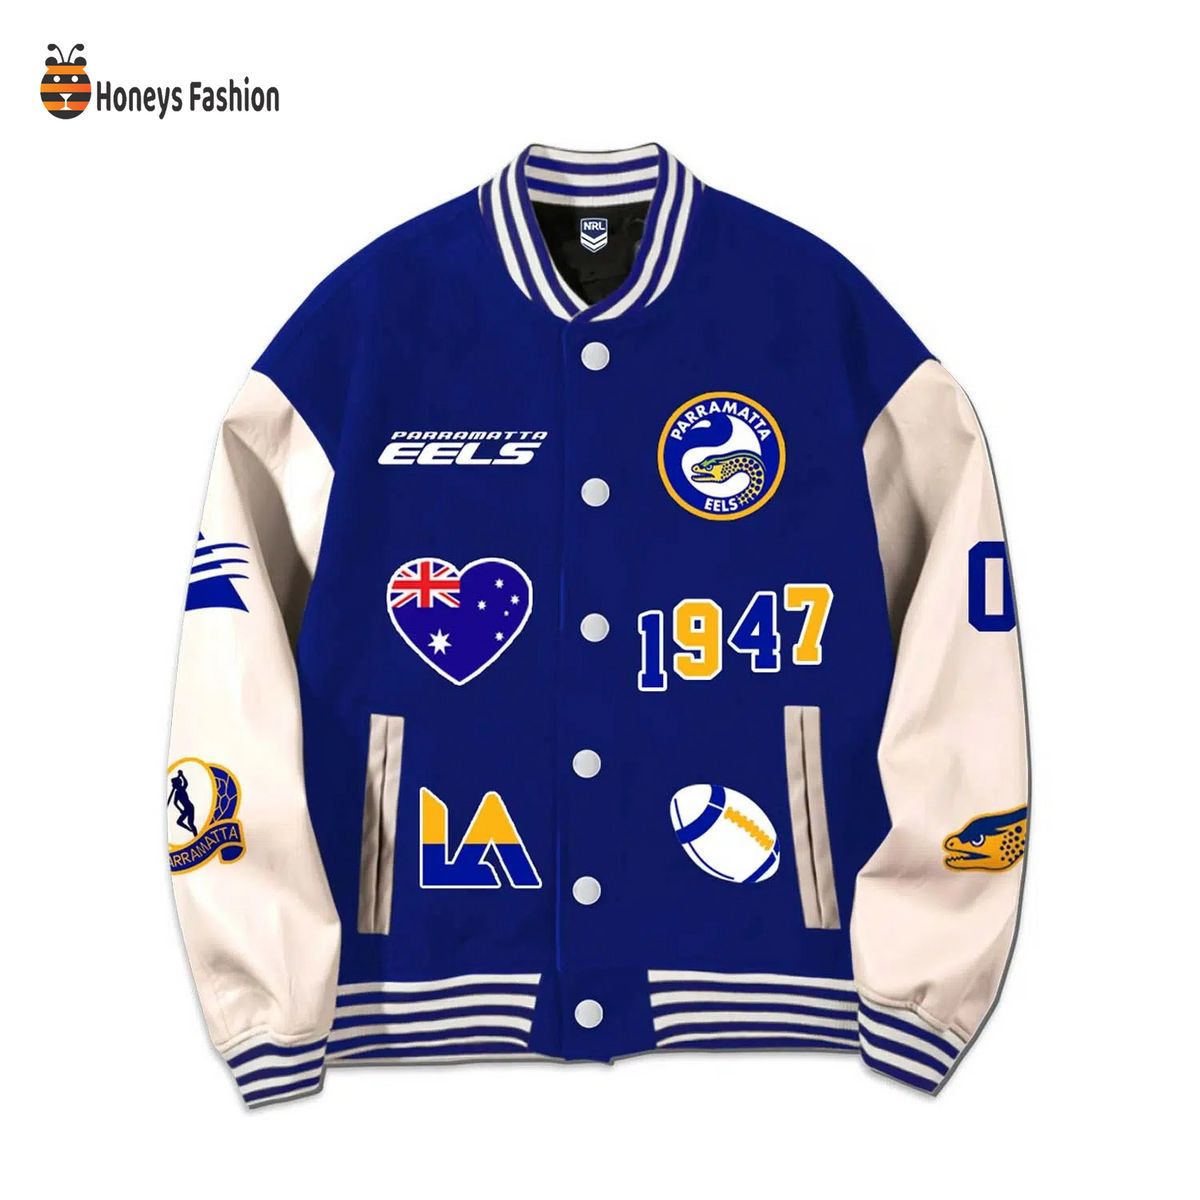 Parramatta Eels Rugby Personalized Jacket